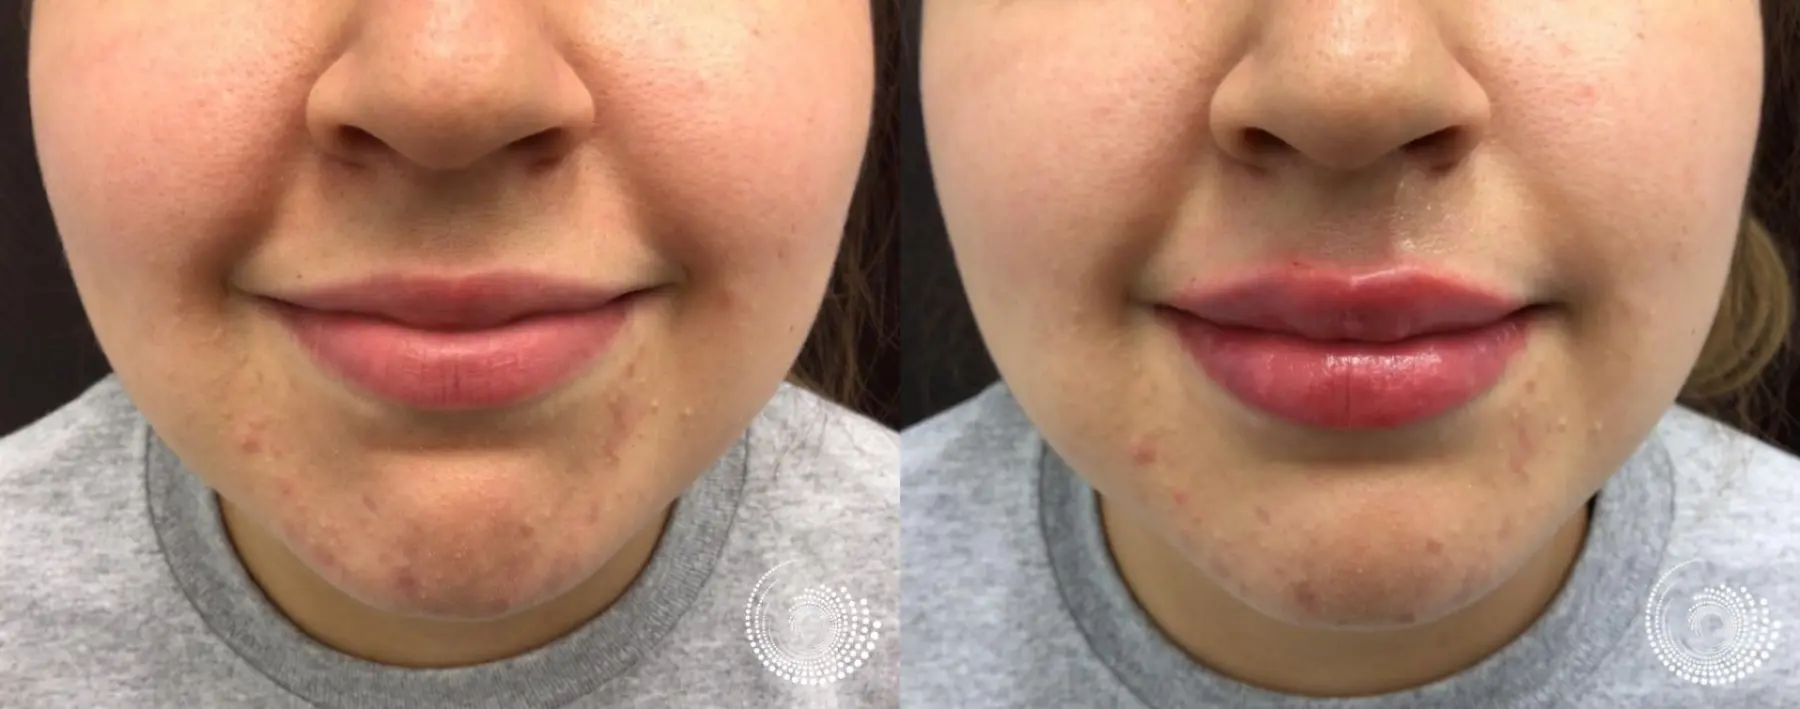 Filler - Lips: Patient 2 - Before and After 5